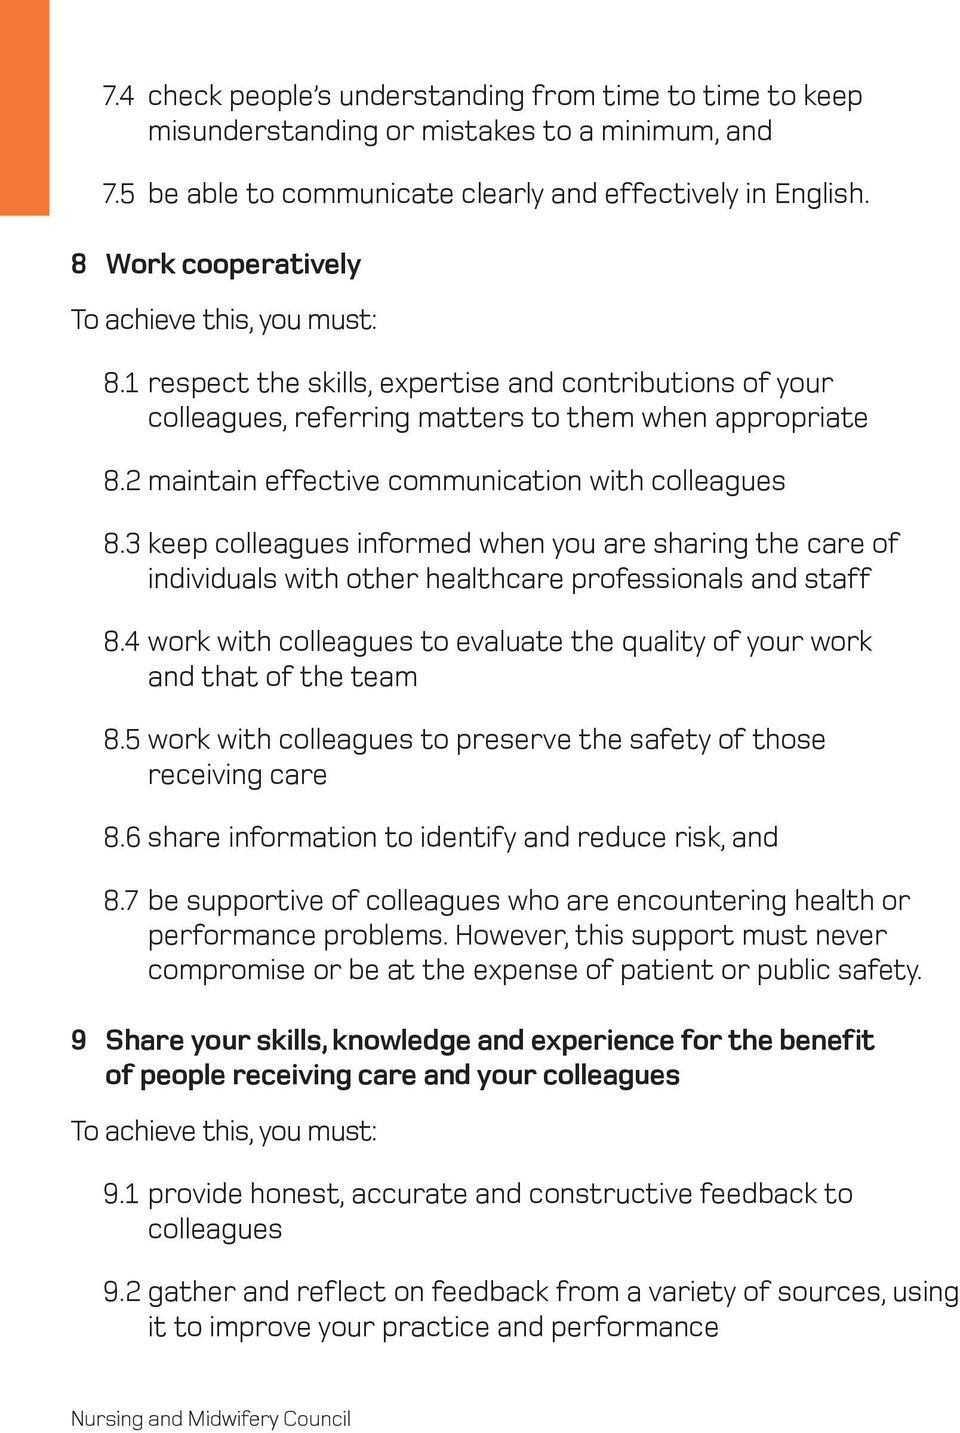 3 keep colleagues informed when you are sharing the care of individuals with other healthcare professionals and staff 8.